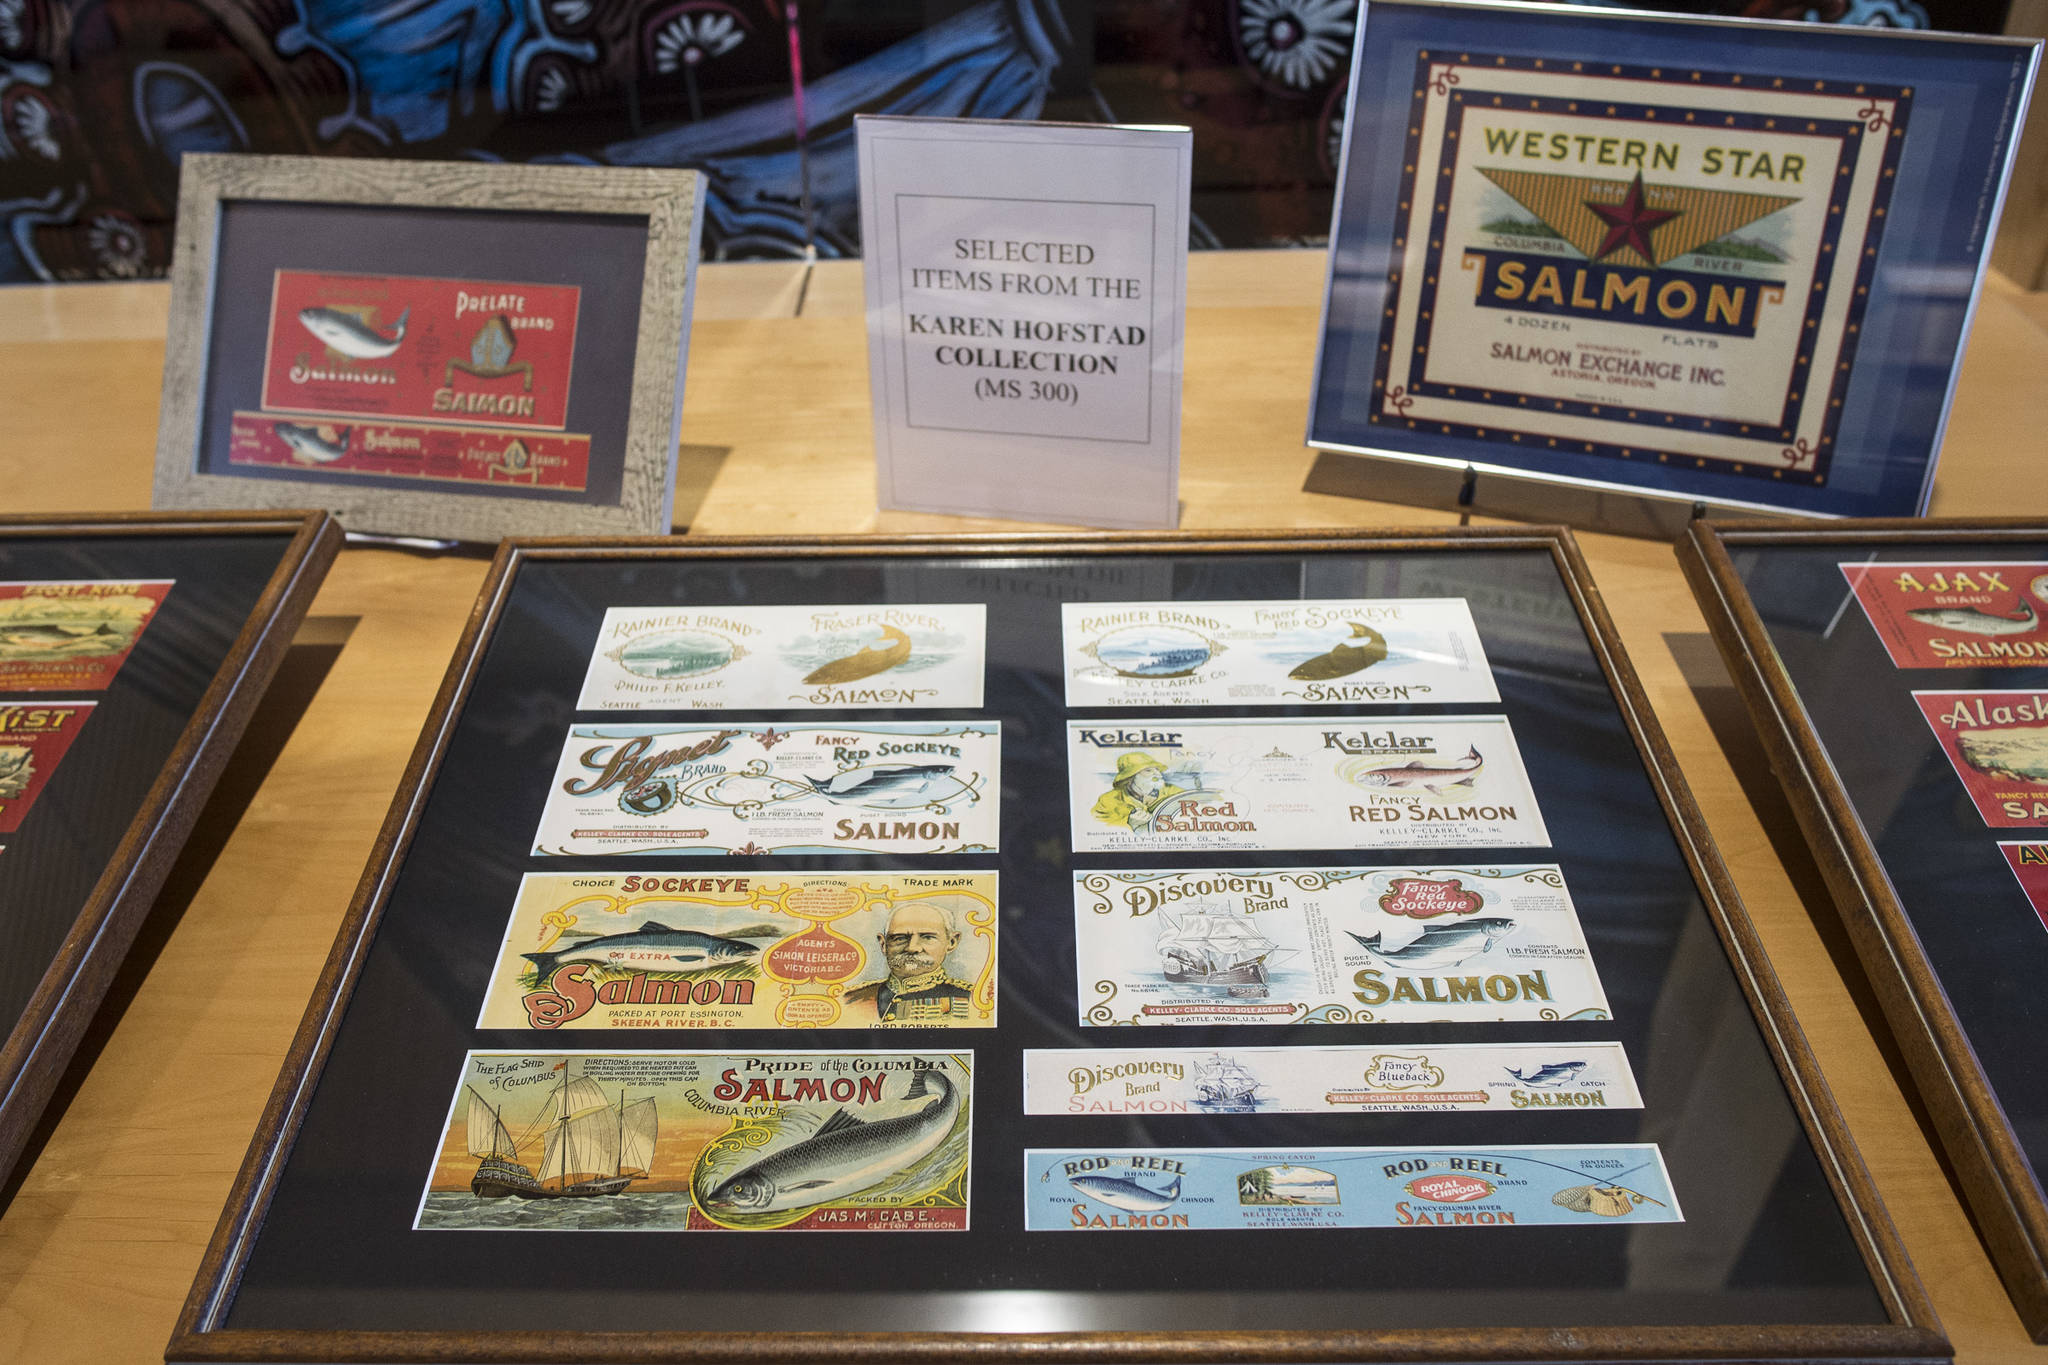 The Alaska State Library features historic salmon canneries with a collection from the Karen Hofstad at the Research Center for First Friday on Friday, June 7, 2019. (Michael Penn | Juneau Empire)